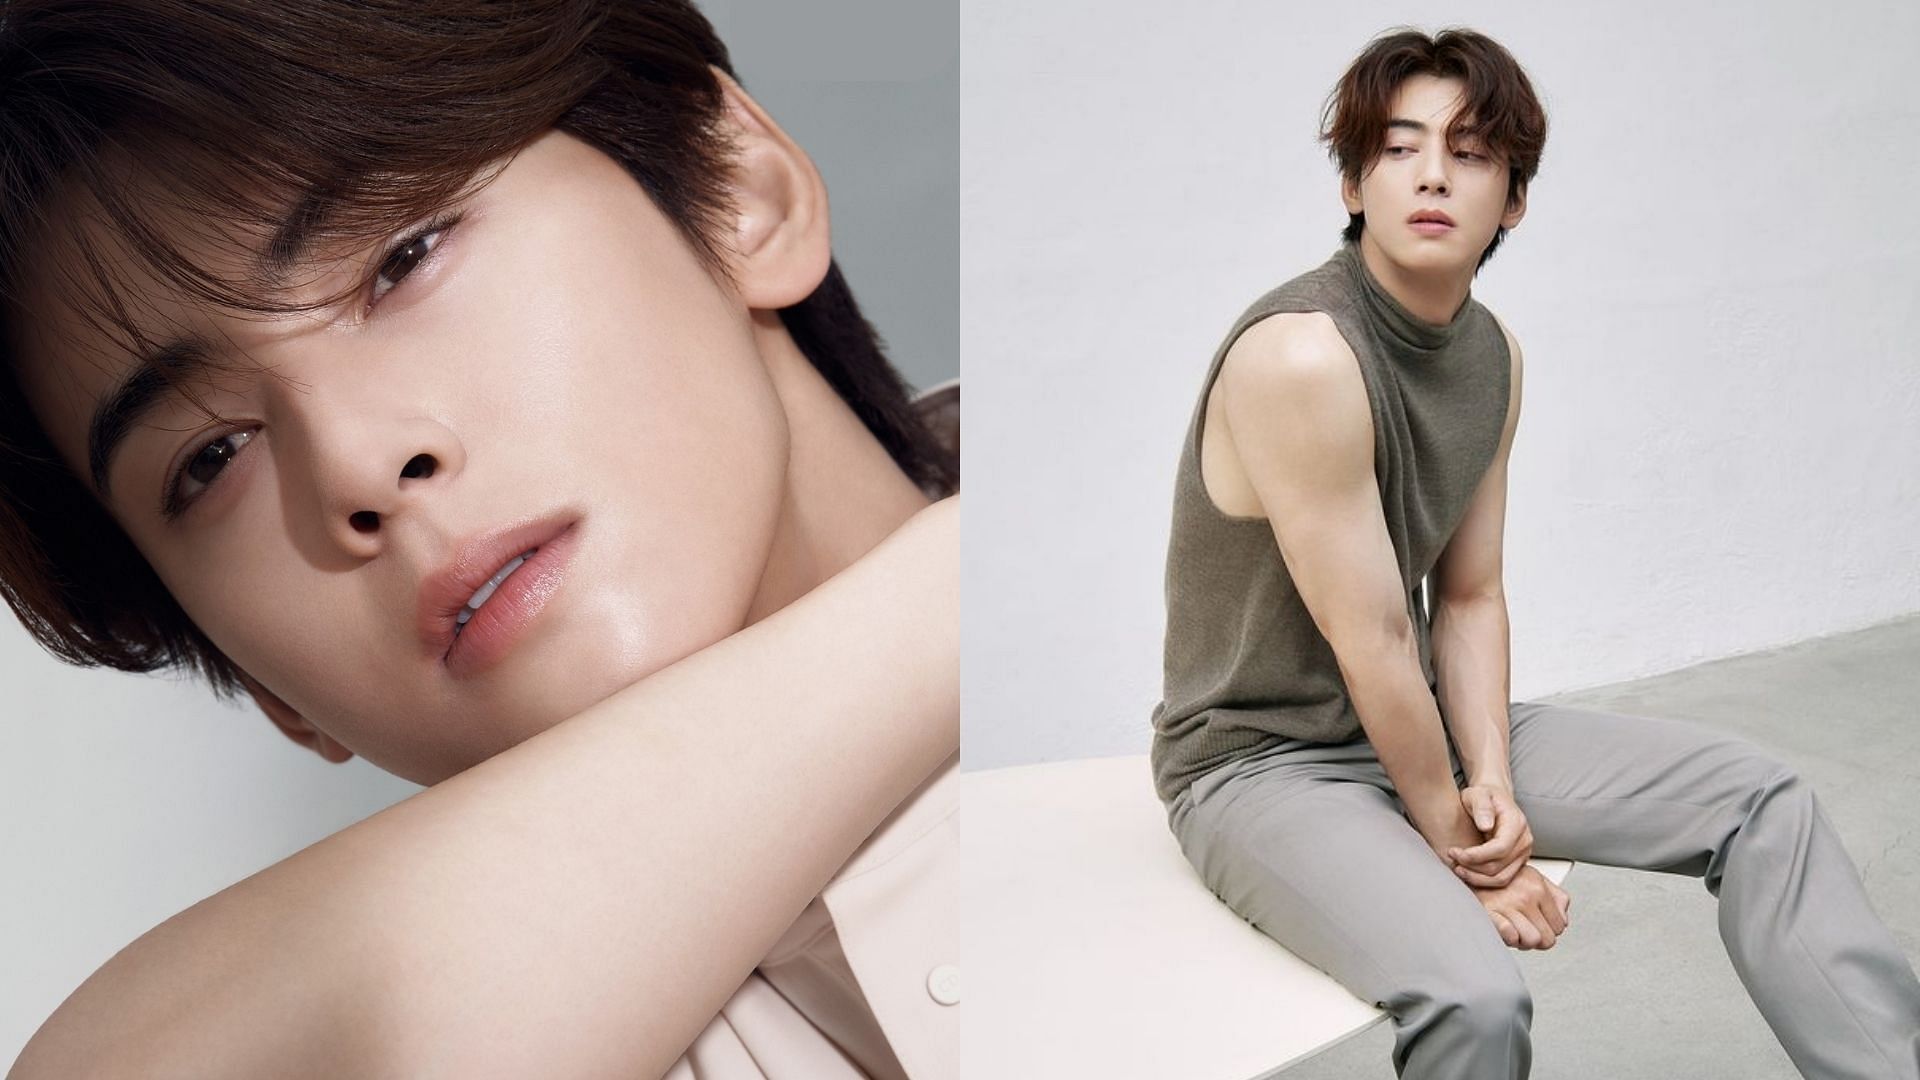 The only owner of true beauty” Fans swoon over ASTRO's Cha Eunwoo as he  melts hearts with enticing cover pictures for DIOR x ELLE Singapore